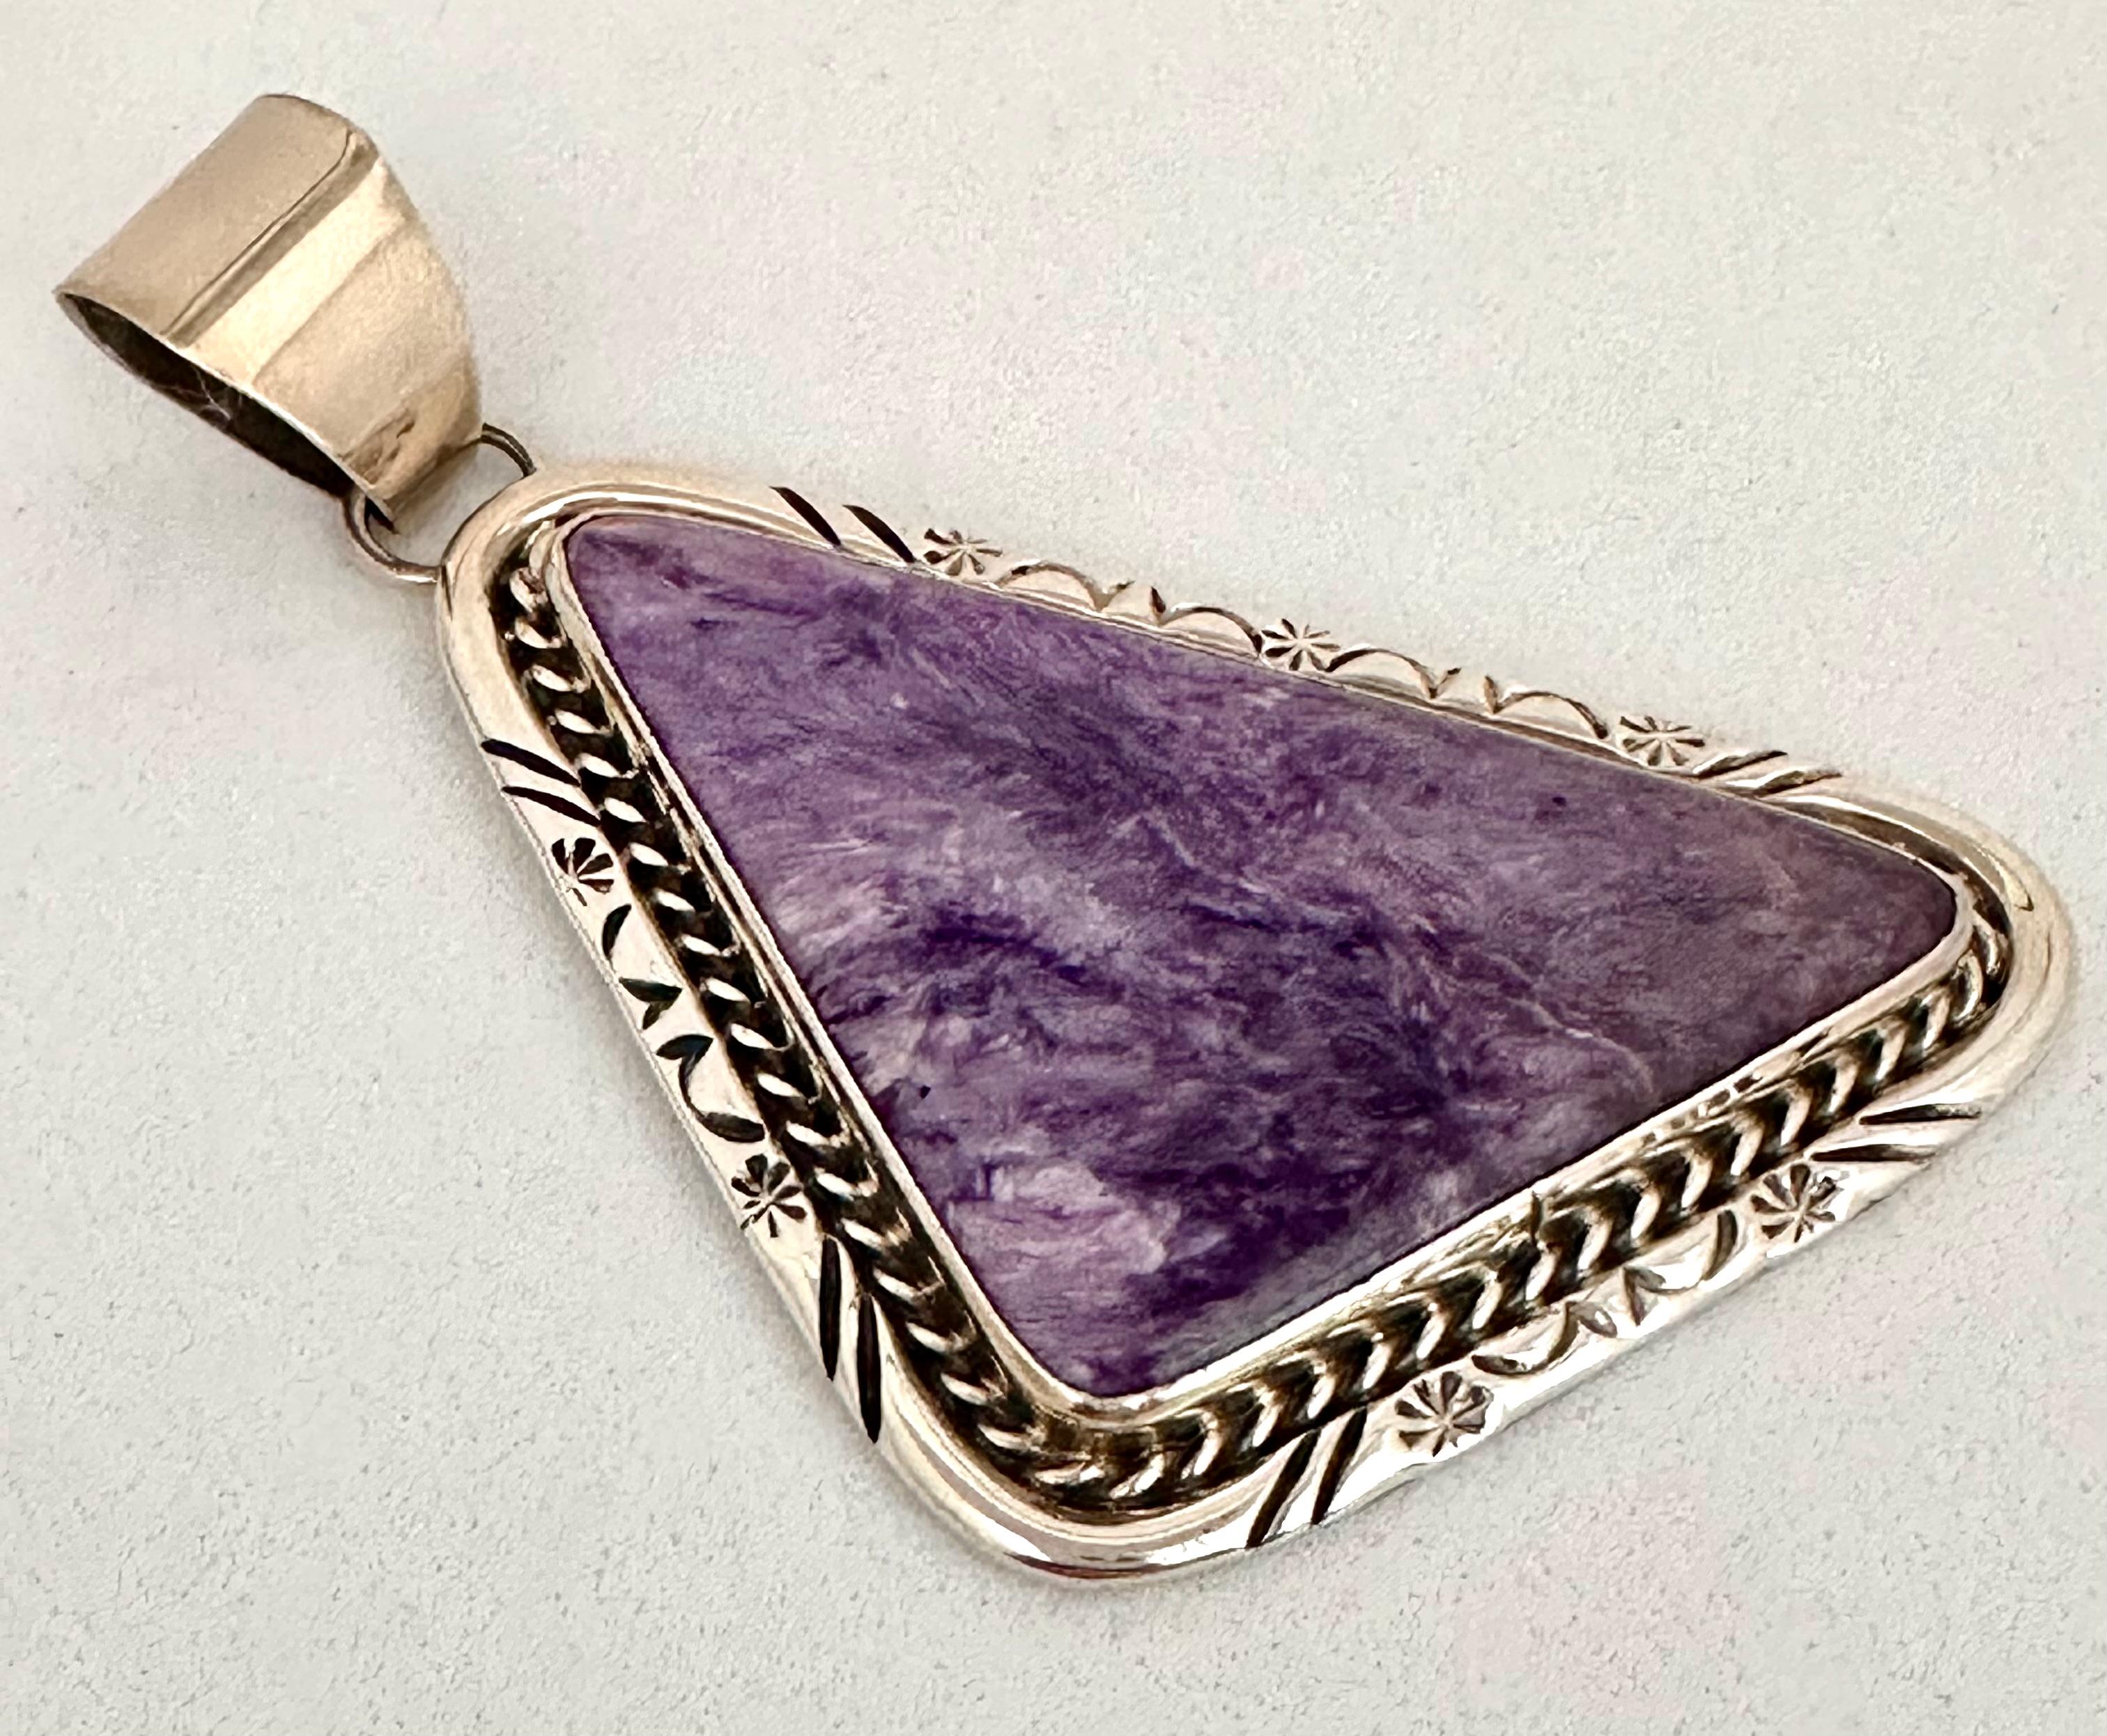 Cabochon Sterling Silver .925 Charoite Pendant Signed by Bill Mex Dineh's For Sale